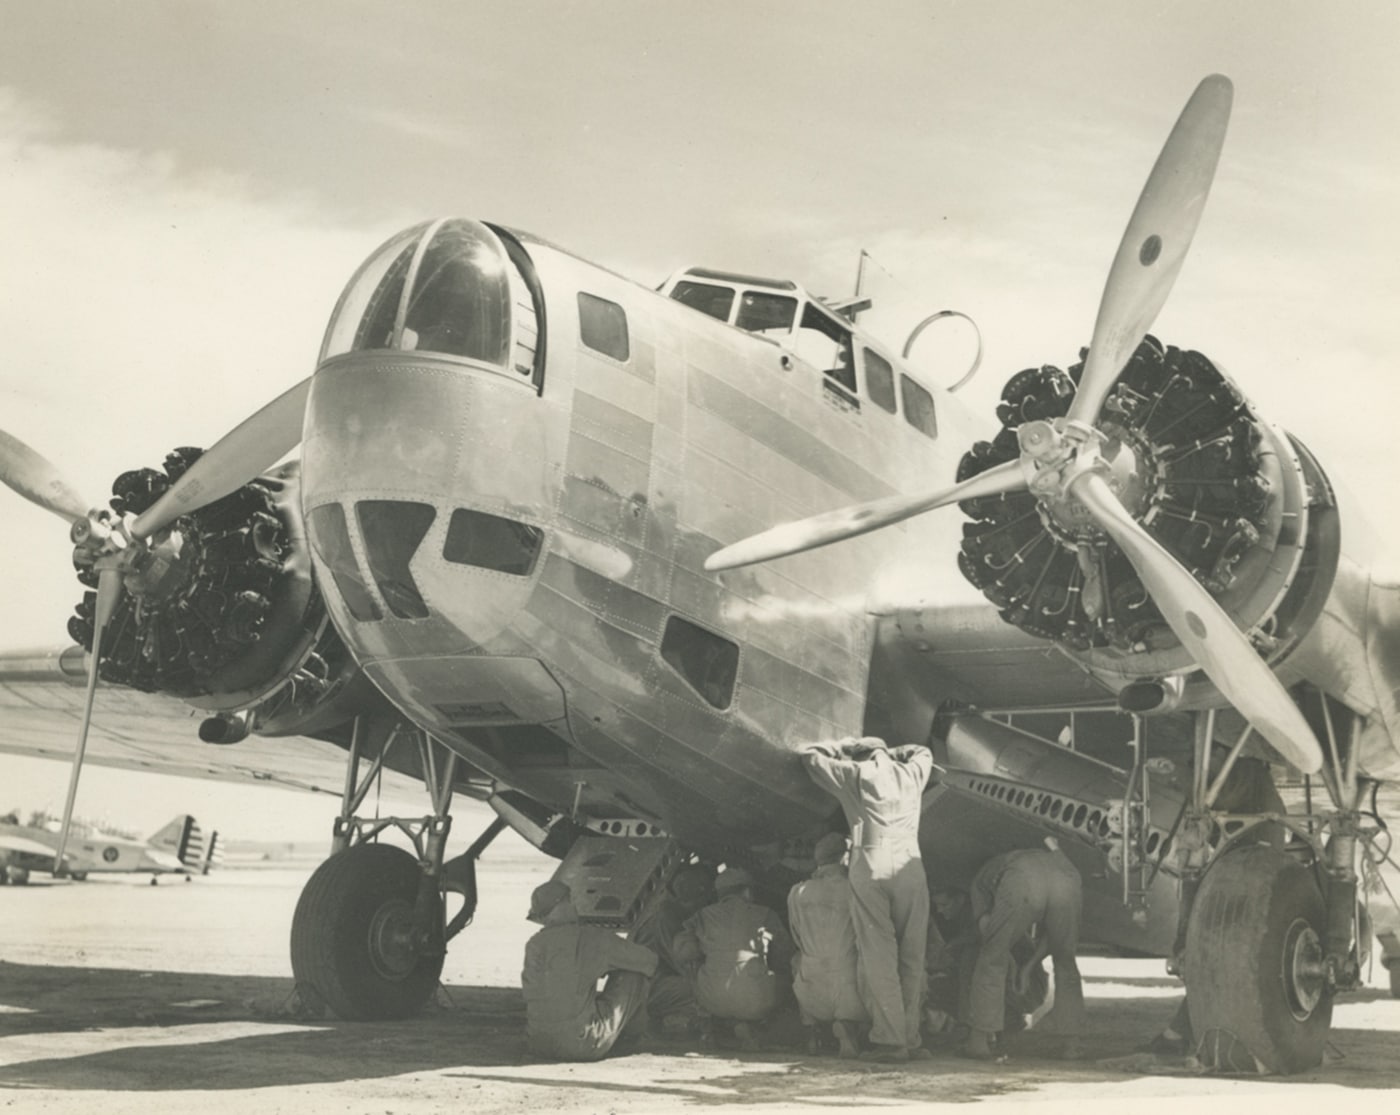 In this photo, we see the front of a B-18 while ground crew members work on the plane. This is an original plane without any variation modifier. By the time the B-18s ended production the country was involved in World War 2, production of all planes had ceased in favor of the more powerful B-17 bomber that offered longer range and a more precise bombardment capability.